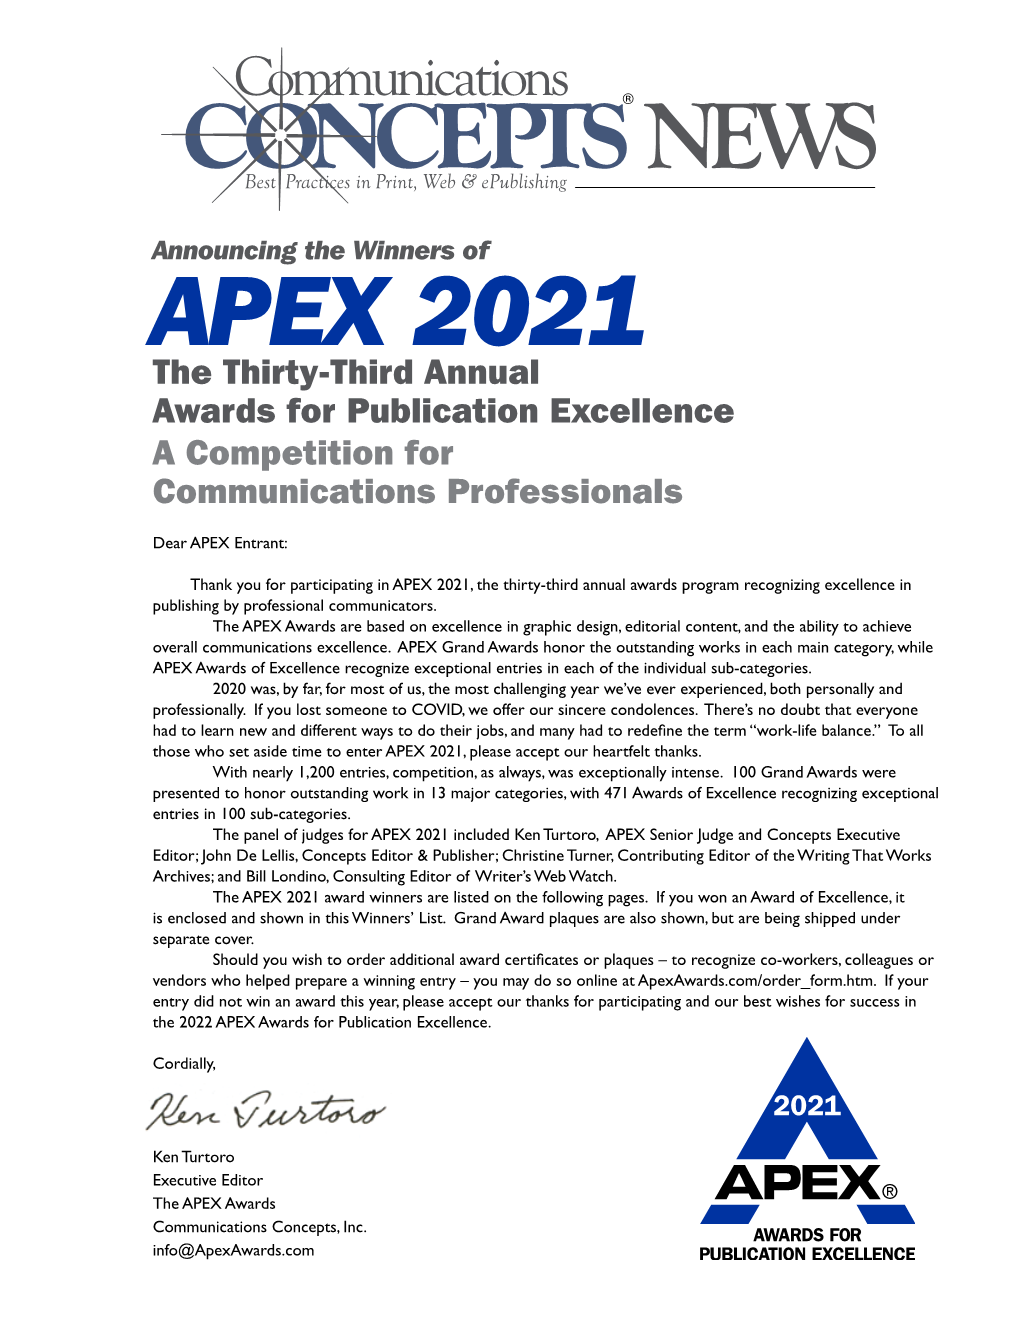 Click Here for the 2021 APEX Awards Winners List!